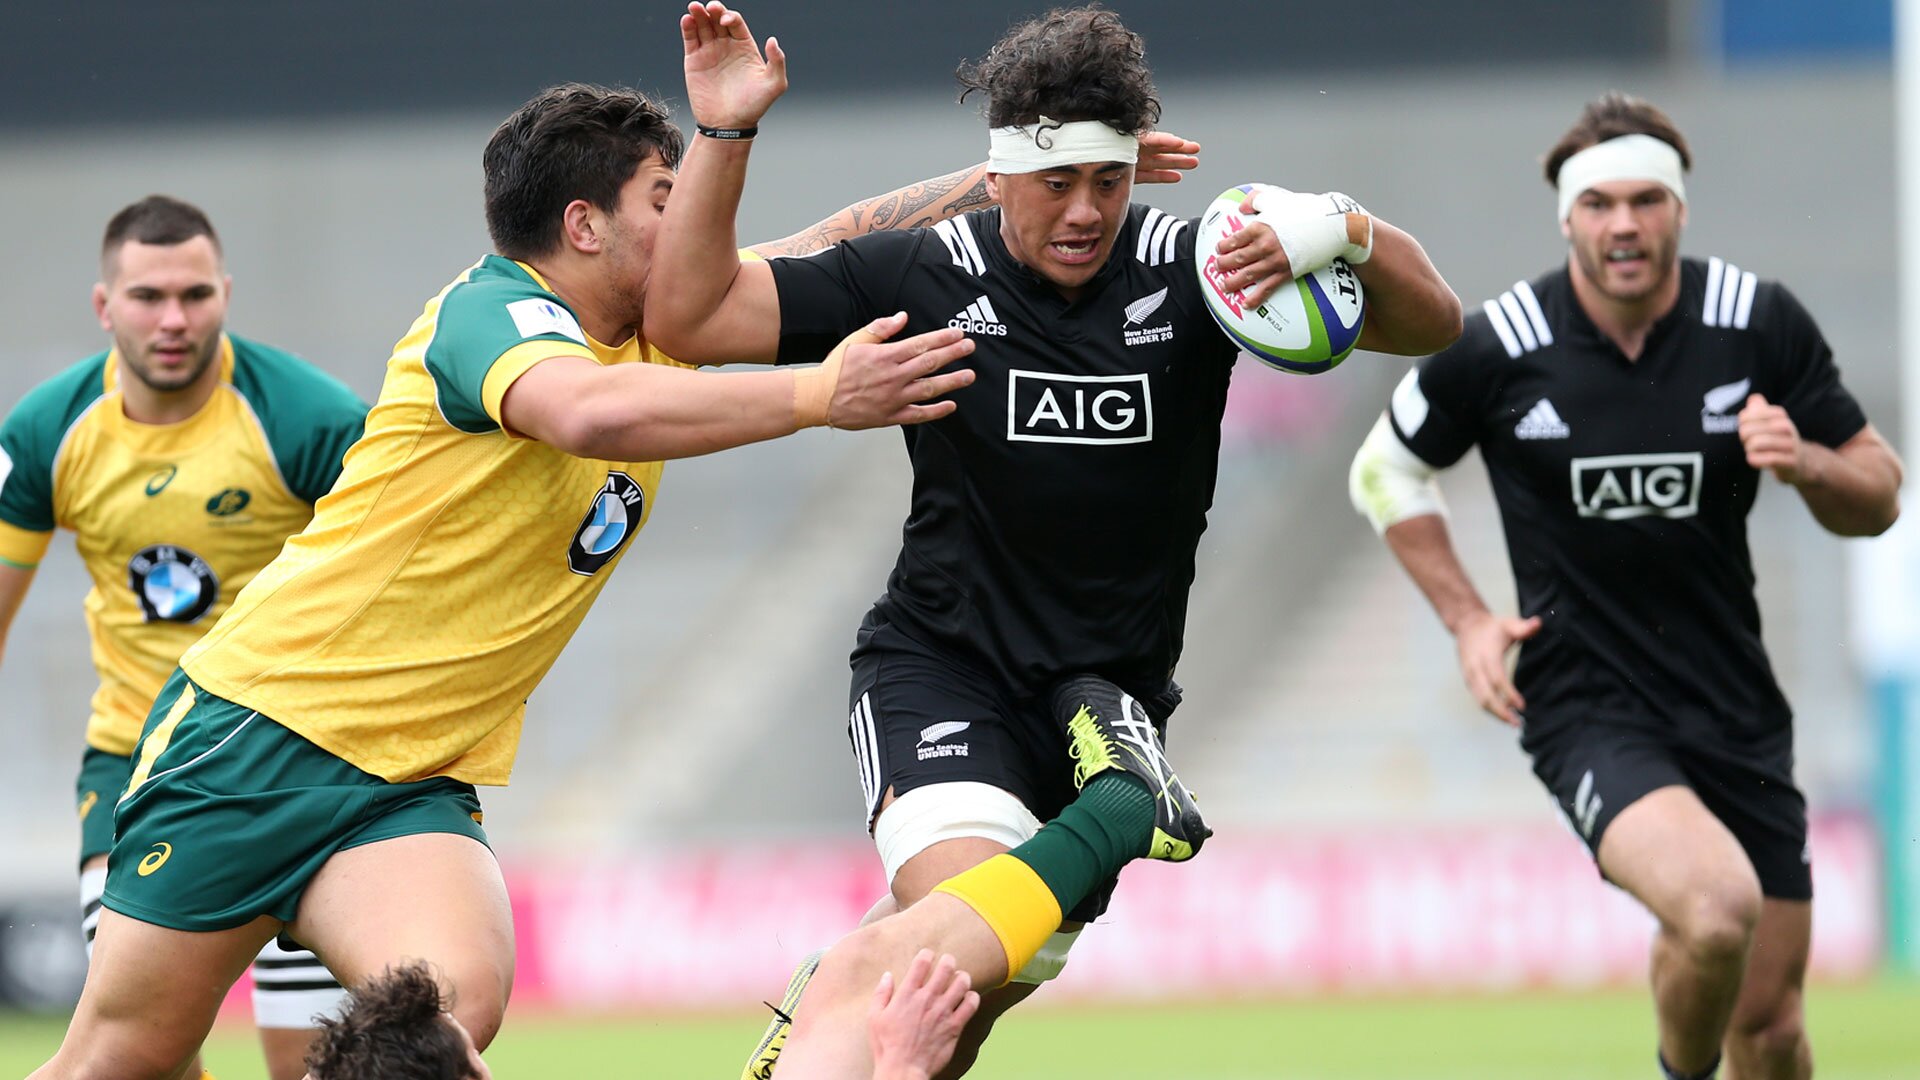 All Blacks coach Foster may have Kieran Read's replacement in 22-year-old Mikaele-Tu'u